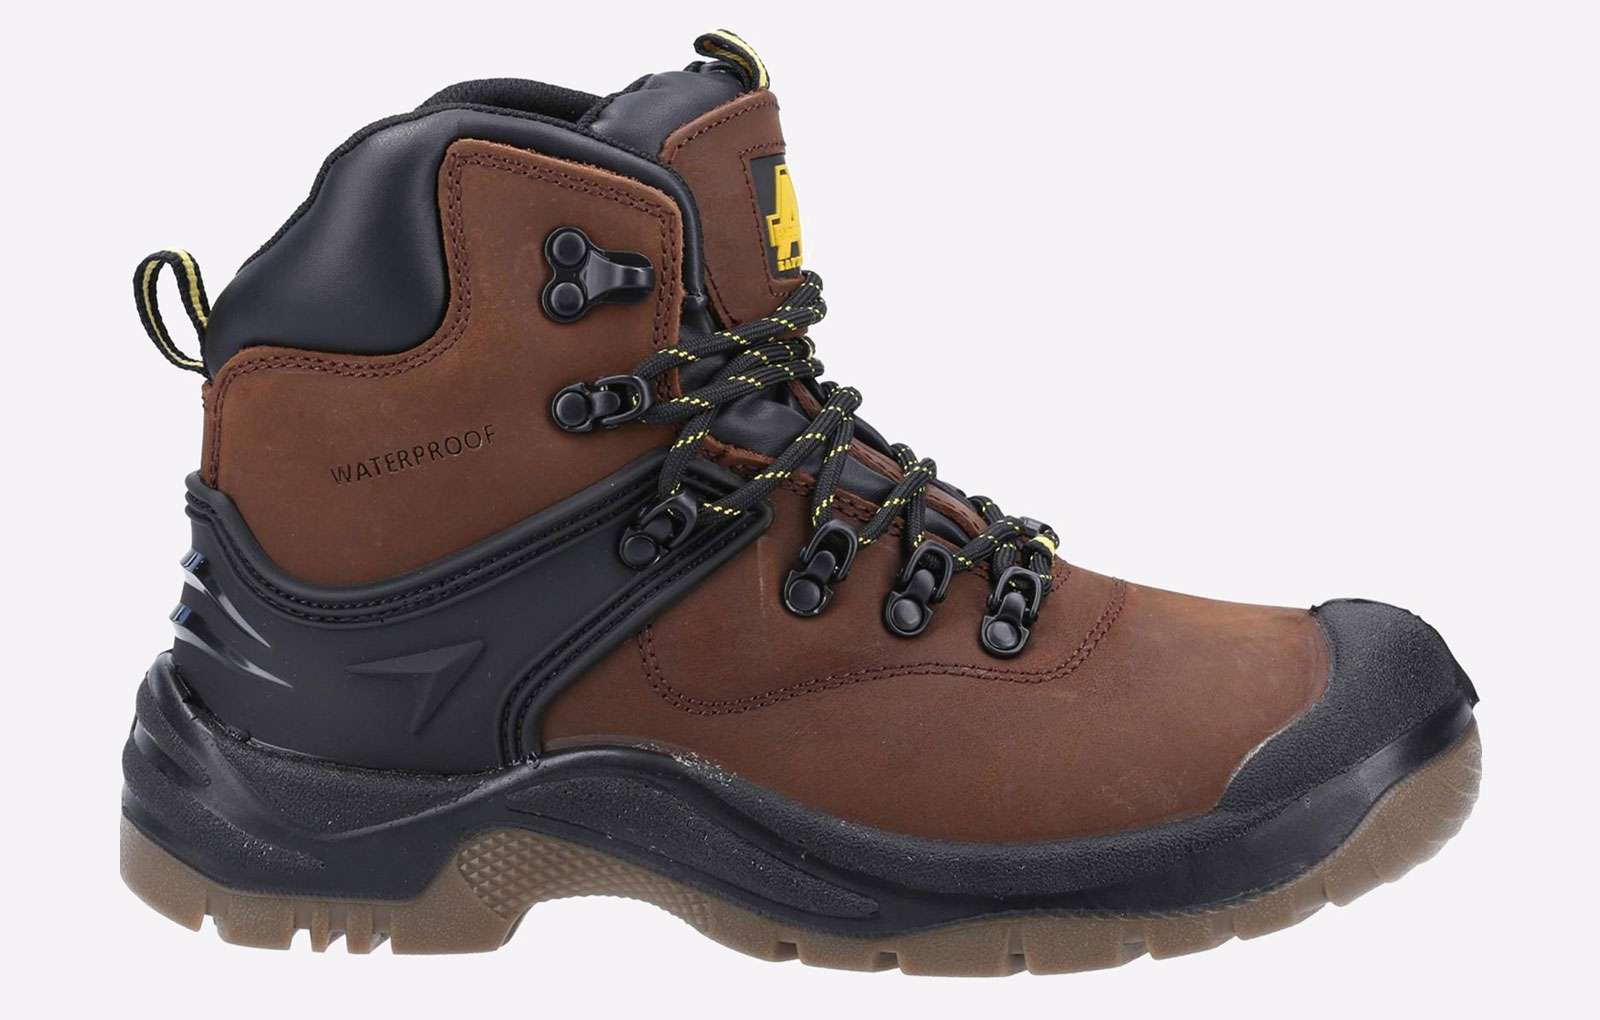 Amblers FS197  Waterproof Lace up Safety Boot Mens - GRD-22744-37112-12